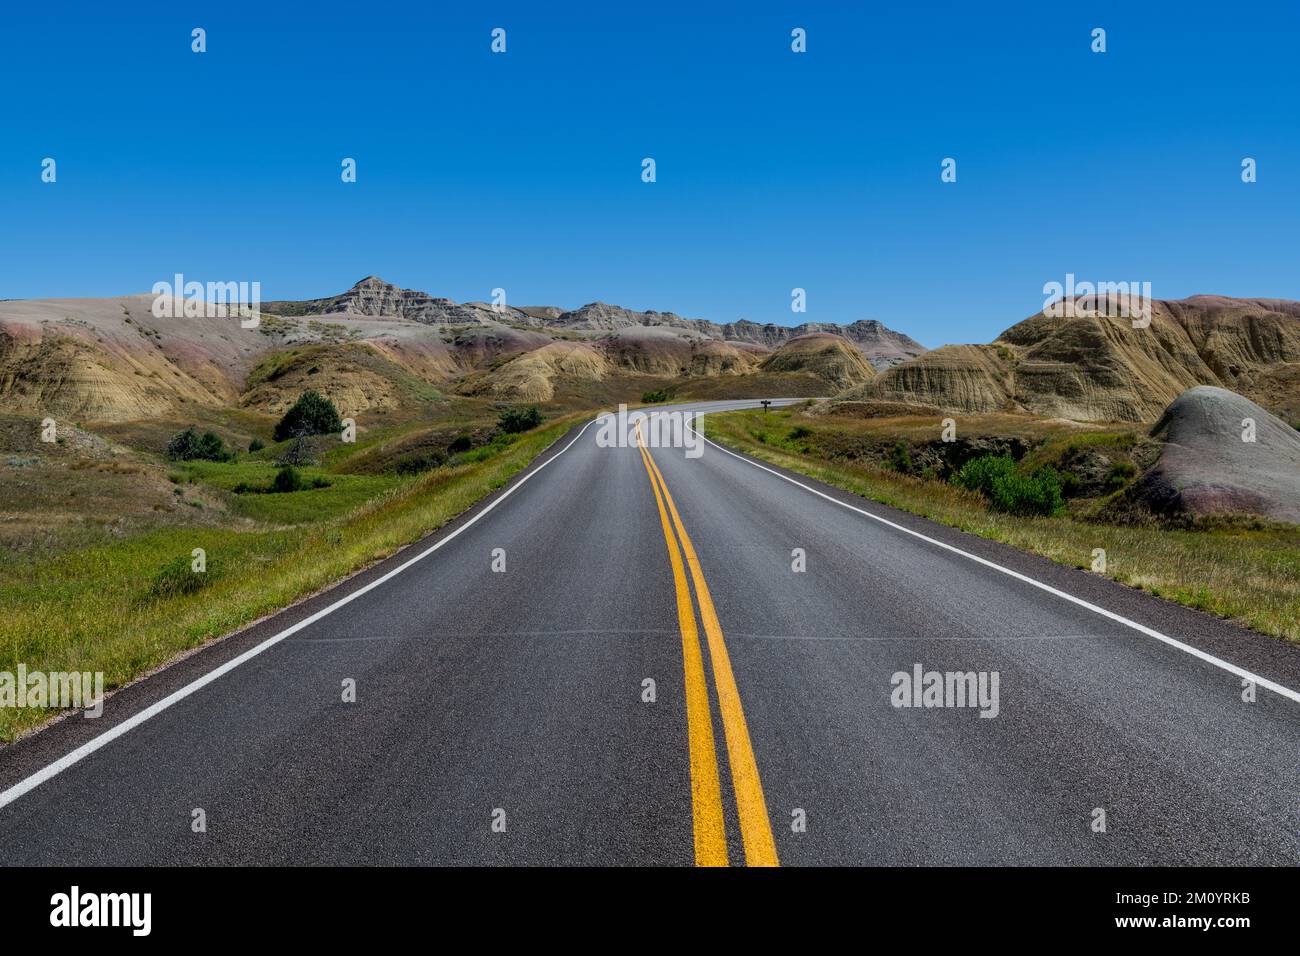 Highway through a landscape of grassy meadows and colorful peaks in Badlands National Park, South Dakota Stock Photo